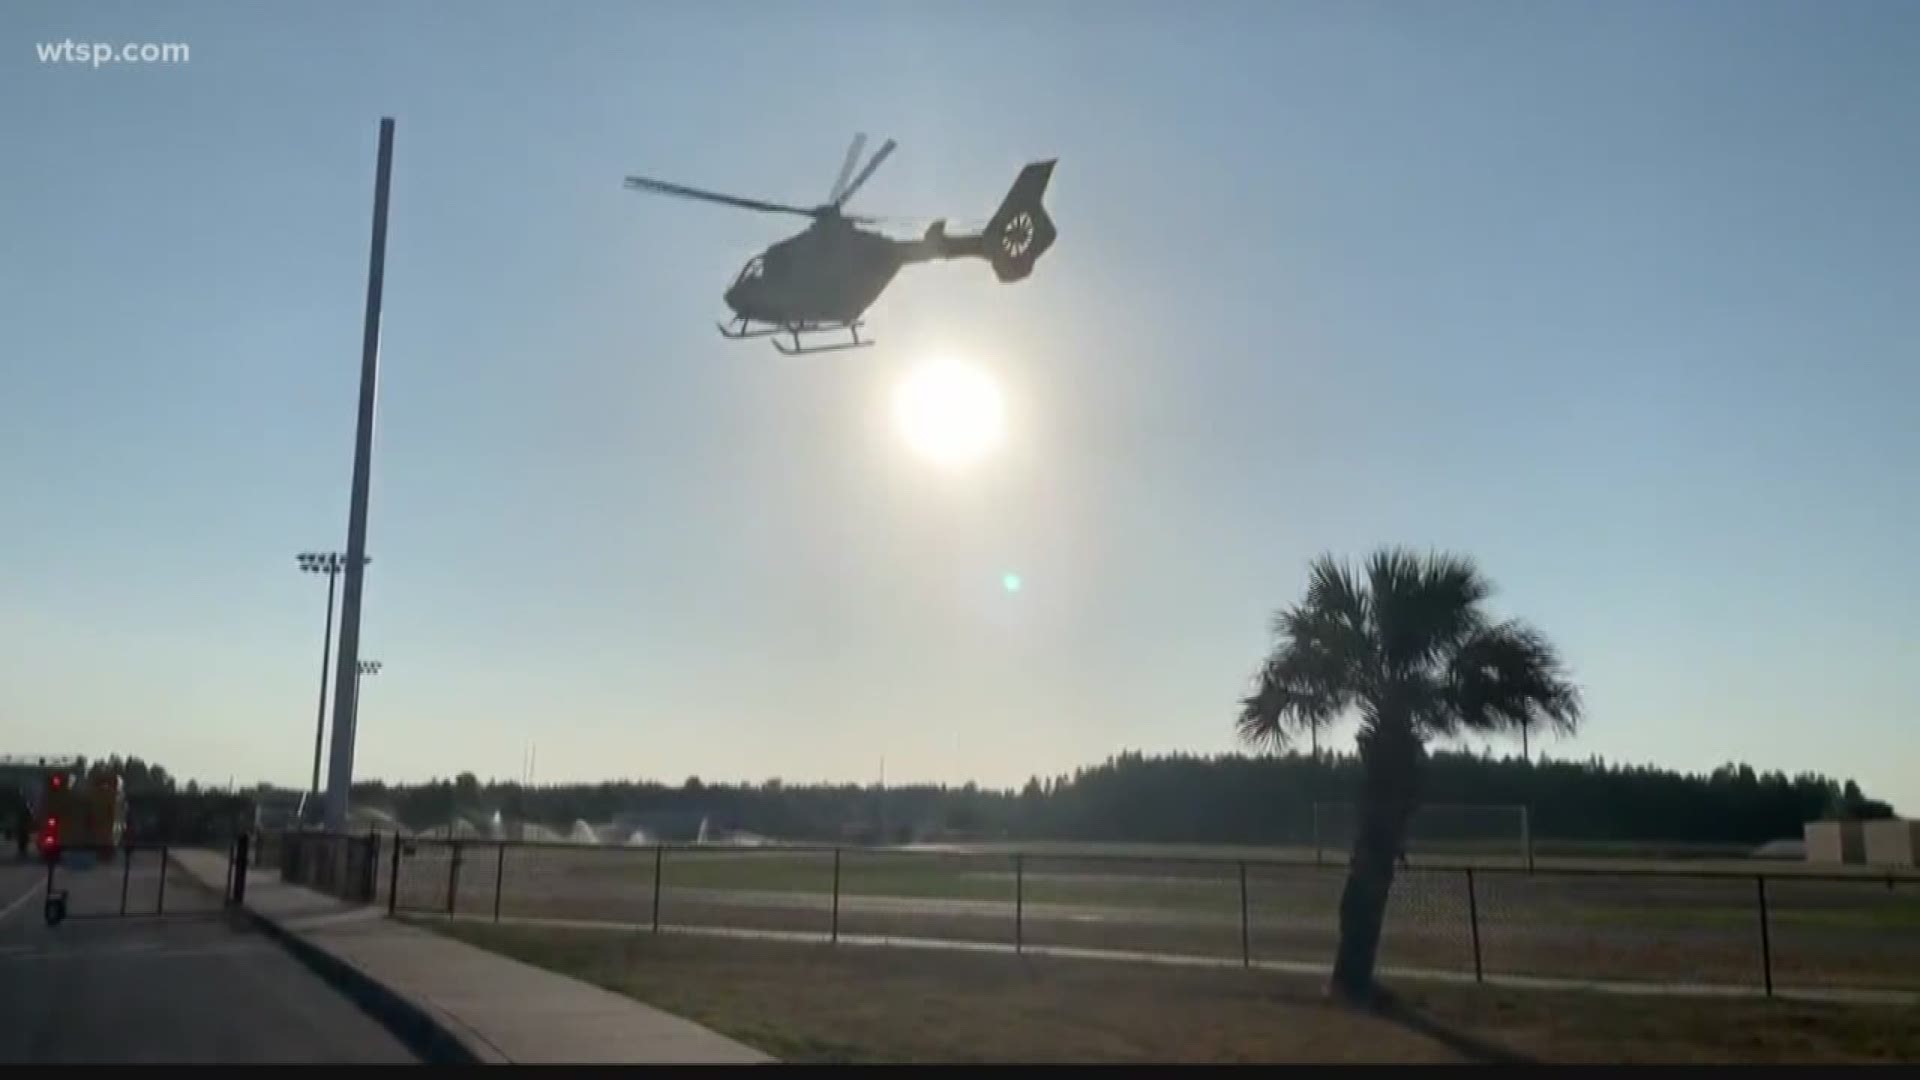 A 3-year-old girl has been flown to the hospital after being hit by a car in Pasco County.

Florida Highway Patrol troopers said the vehicle was backing out of a driveway and hit the 3-year-old on her tricycle.

It happened Wednesday evening on Torvest Court in Land O' Lakes. The child is listed in critical condition, according to Pasco Fire Rescue.